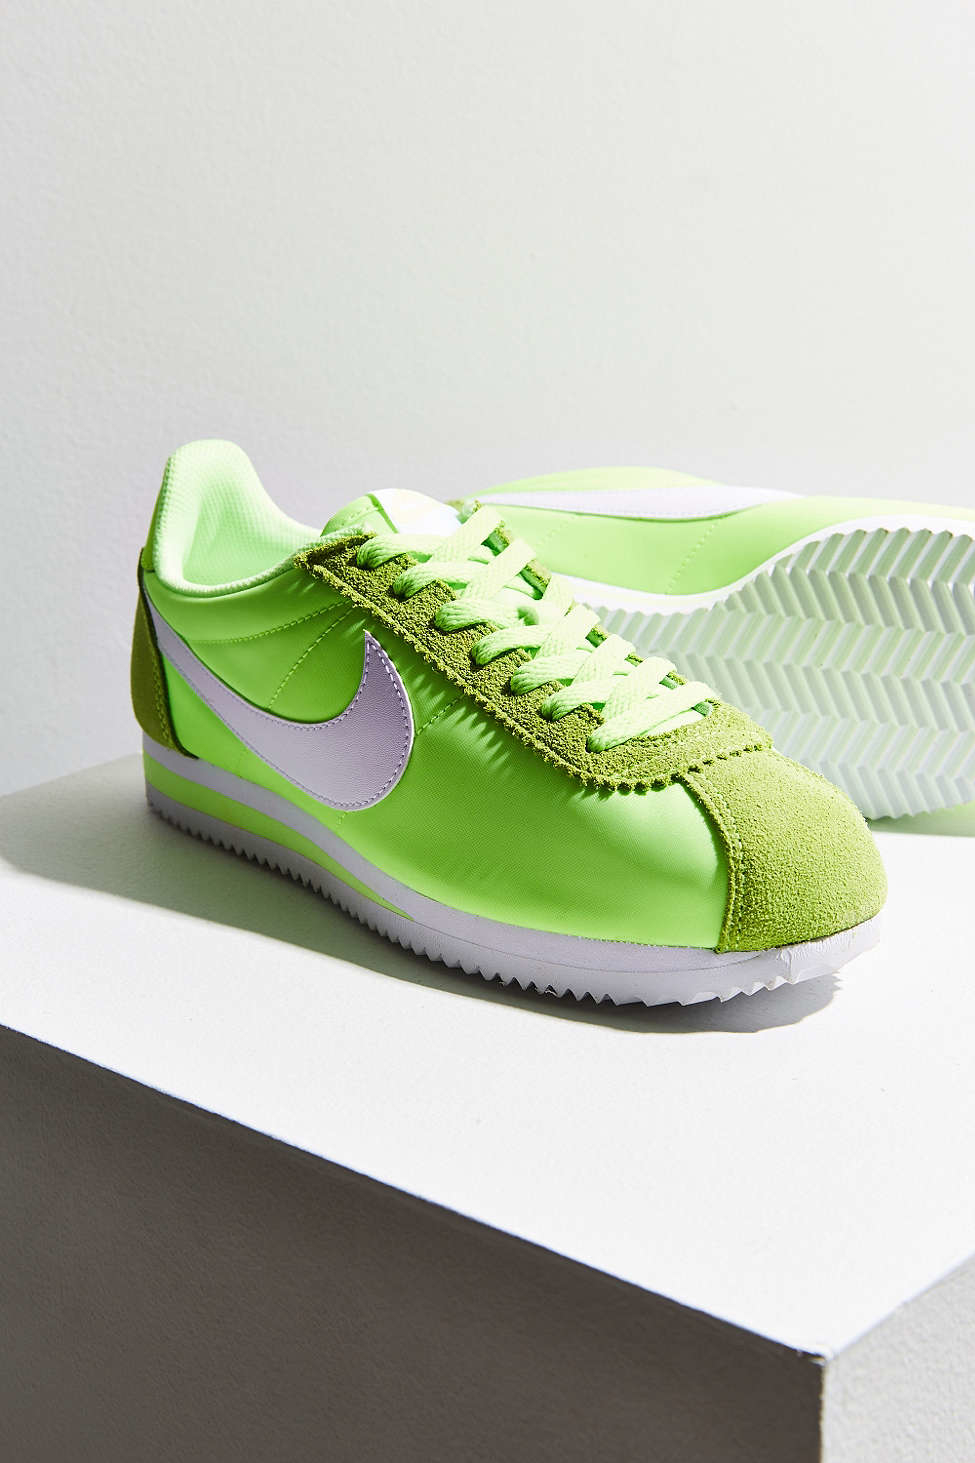 Nike Synthetic Classic Cortez 15 Nylon Sneaker in Lime (Green) | Lyst